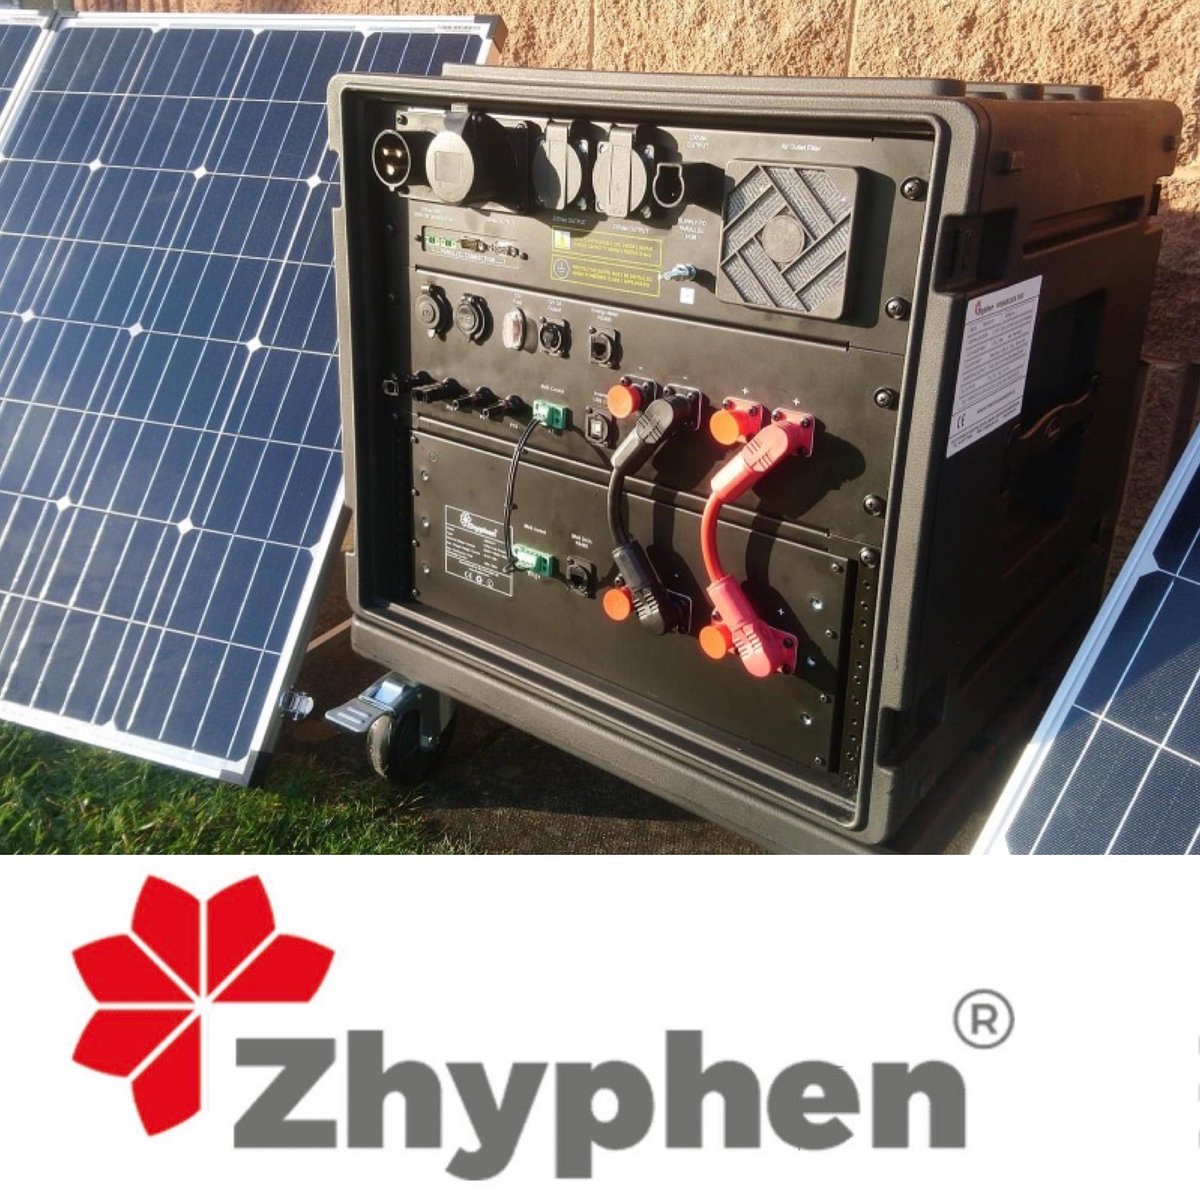 We’d like to introduce you to one of our clients @ZhyphenE , based in Limavady 

Zhyphen believes that energy storage is a fundamental part of the world’s future energy supply for both environmental & economic reasons. 
1/